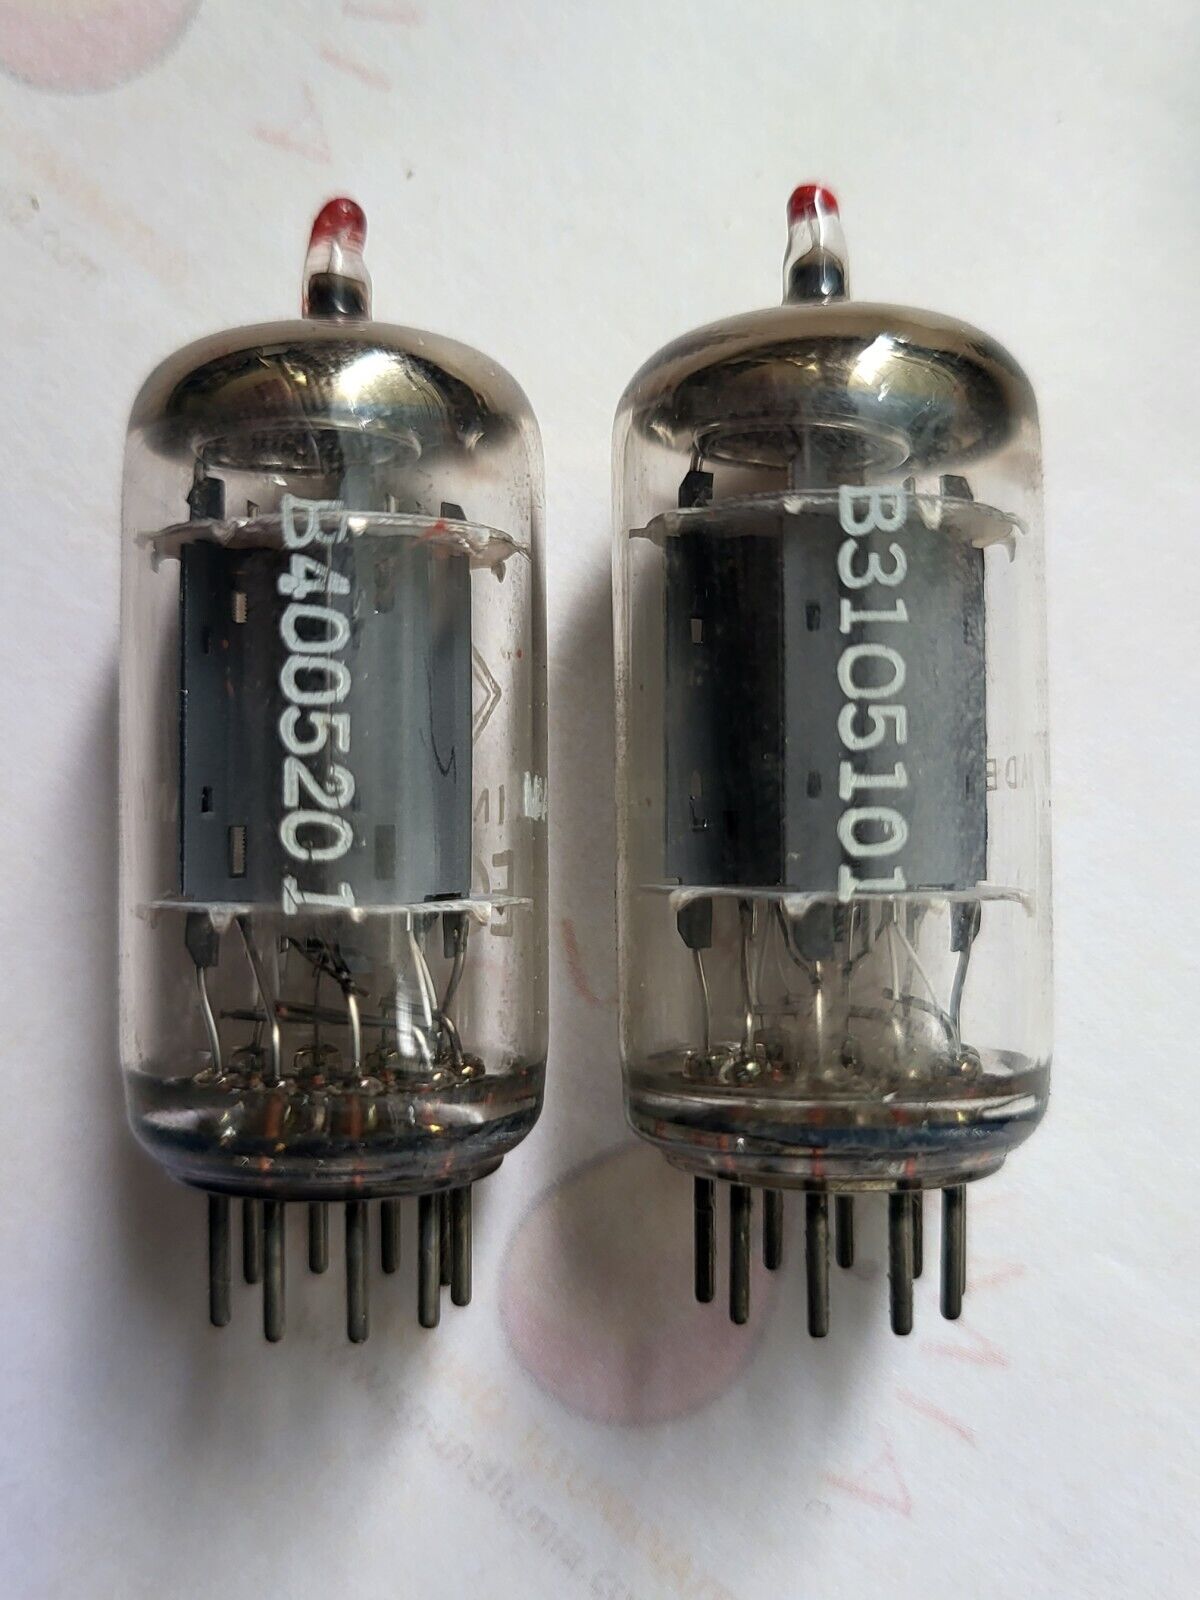 Telefunken ECC83 12AX7 Matched Pair Red Tips - 17mm Smooth Plates - Berlin 1965